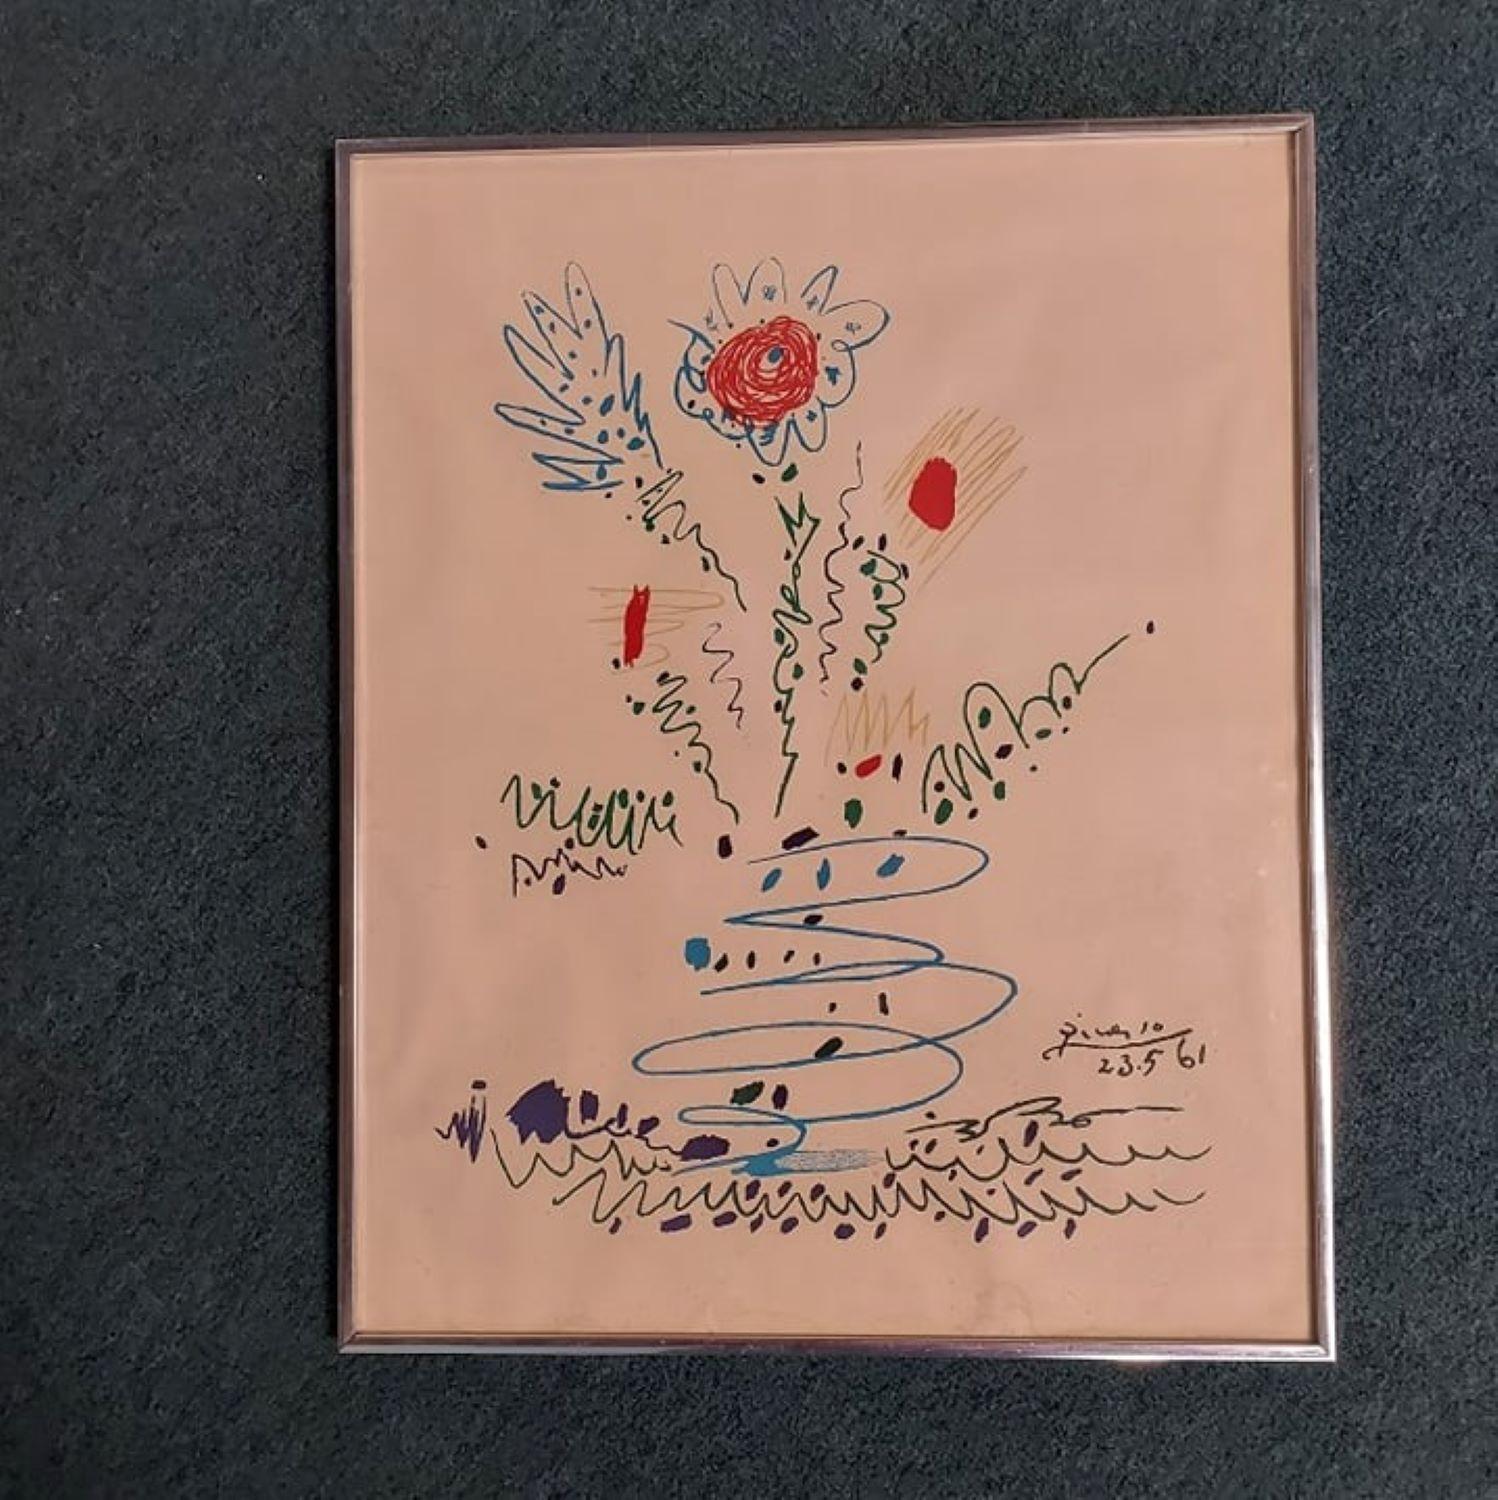 PABLO PICASSO  PRINT Flower 1961 - Print by Pablo Picasso